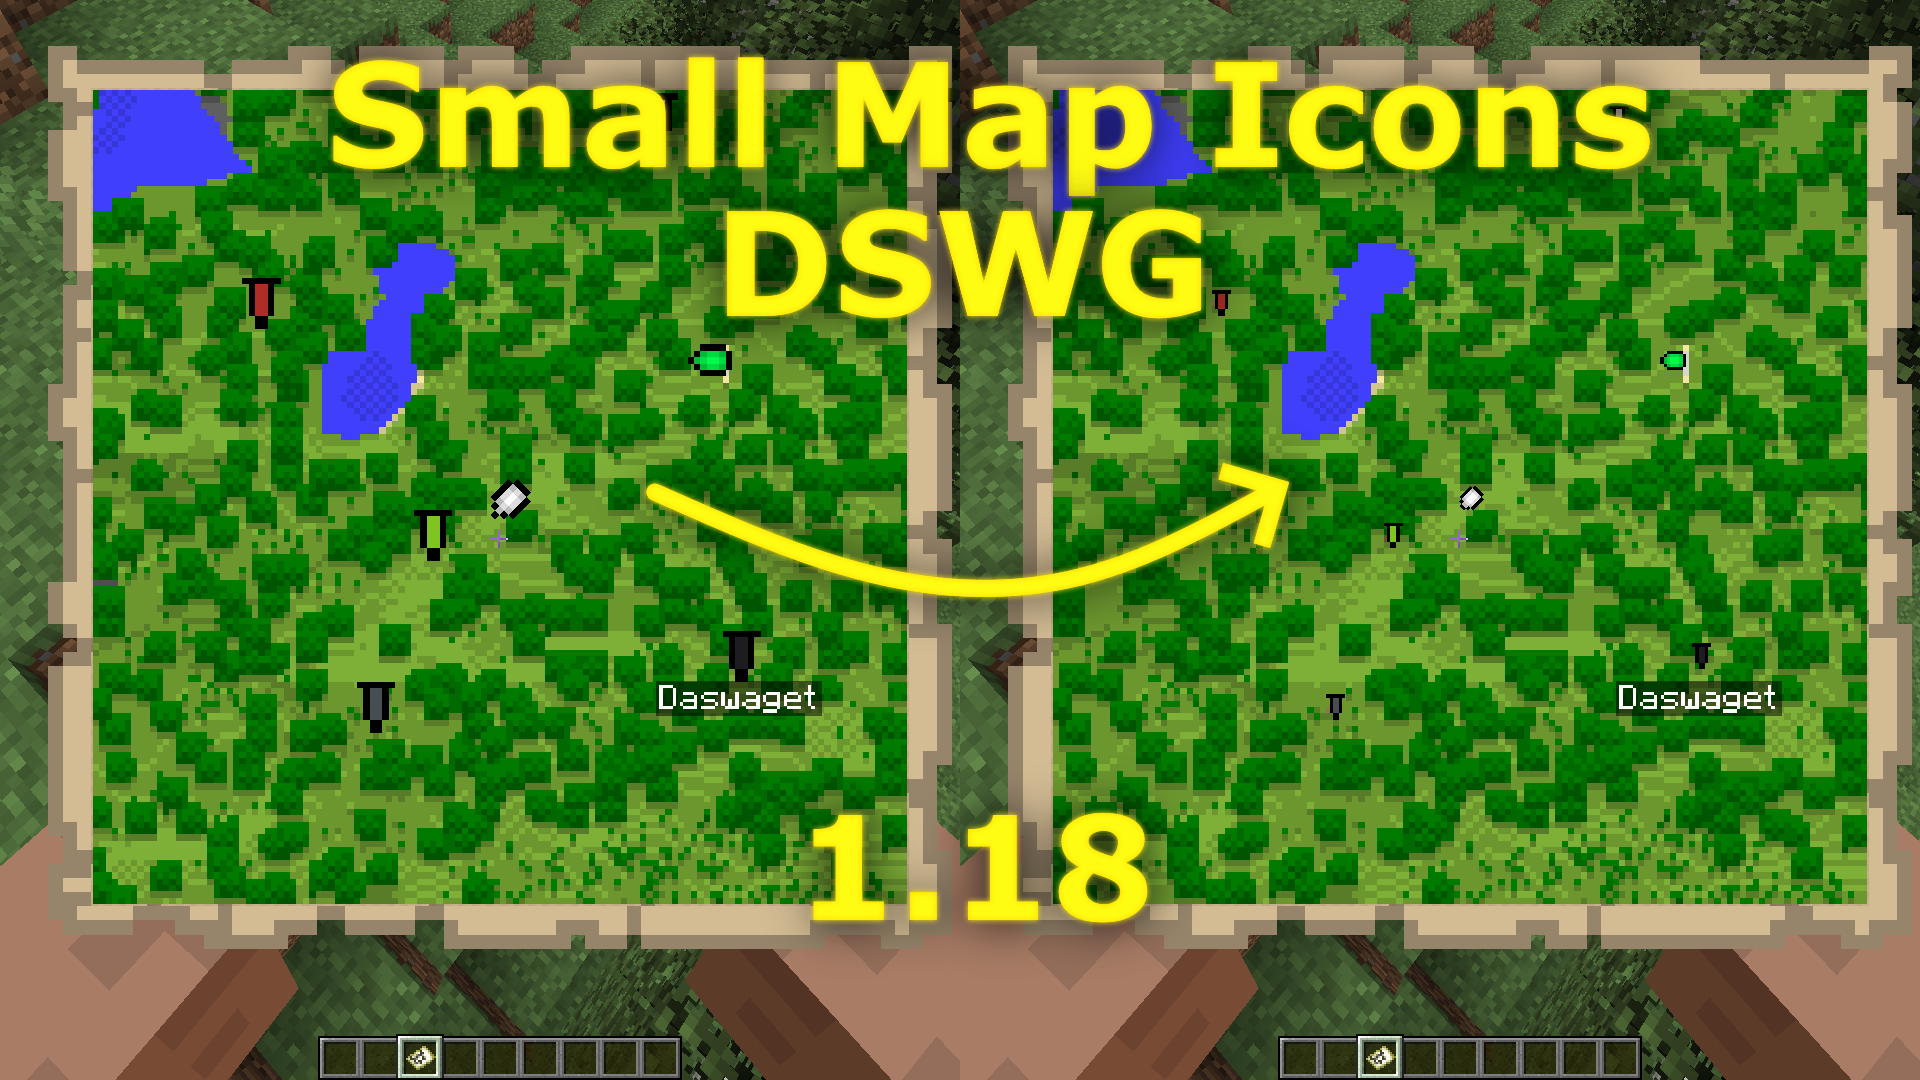 Small map